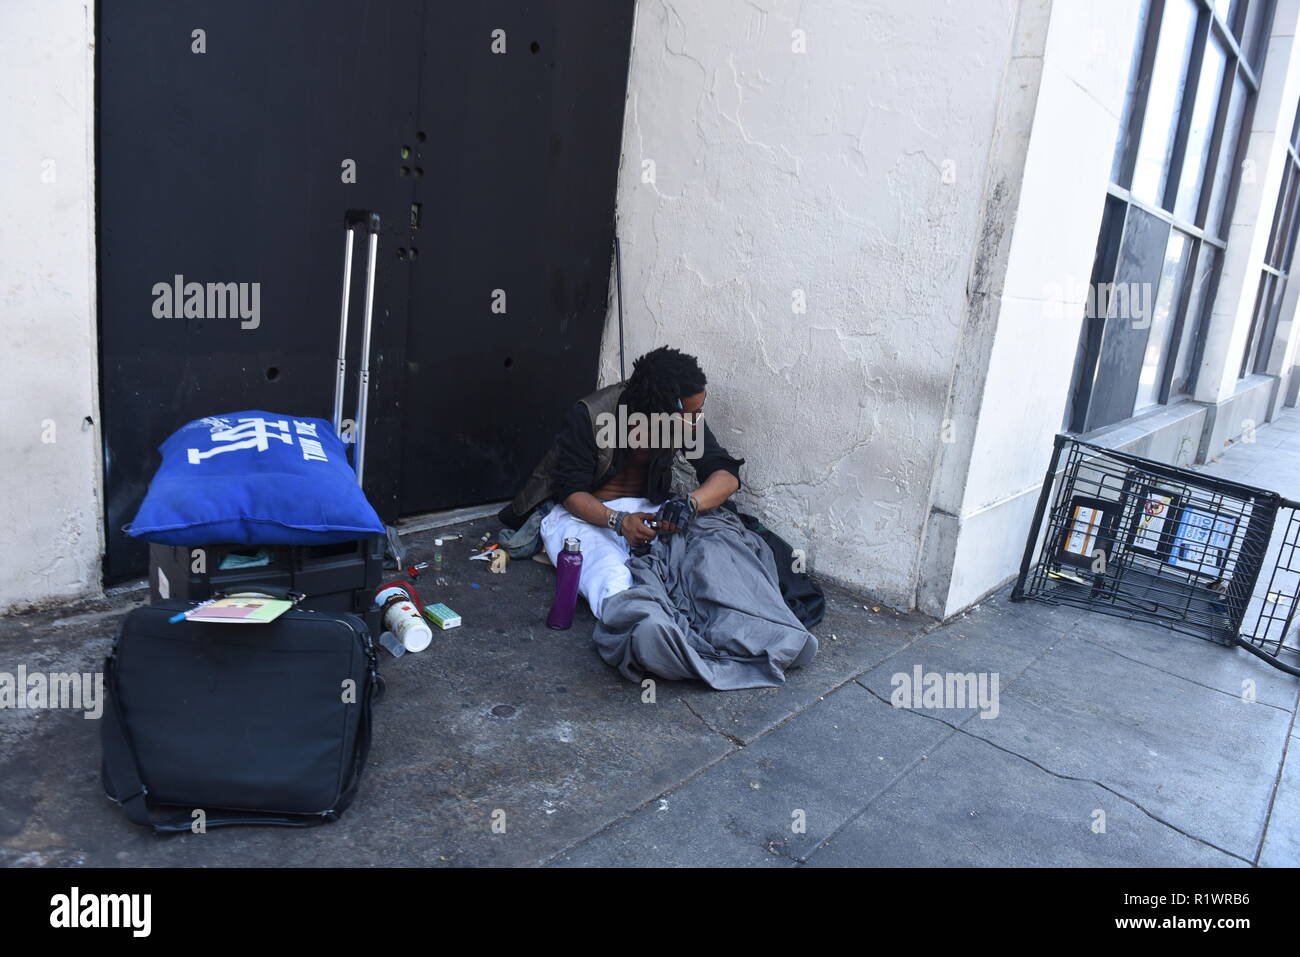 Los Angeles, USA - July 29: Homeless people in the streets of Los Angeles, CA on July 29, 2018. Stock Photo